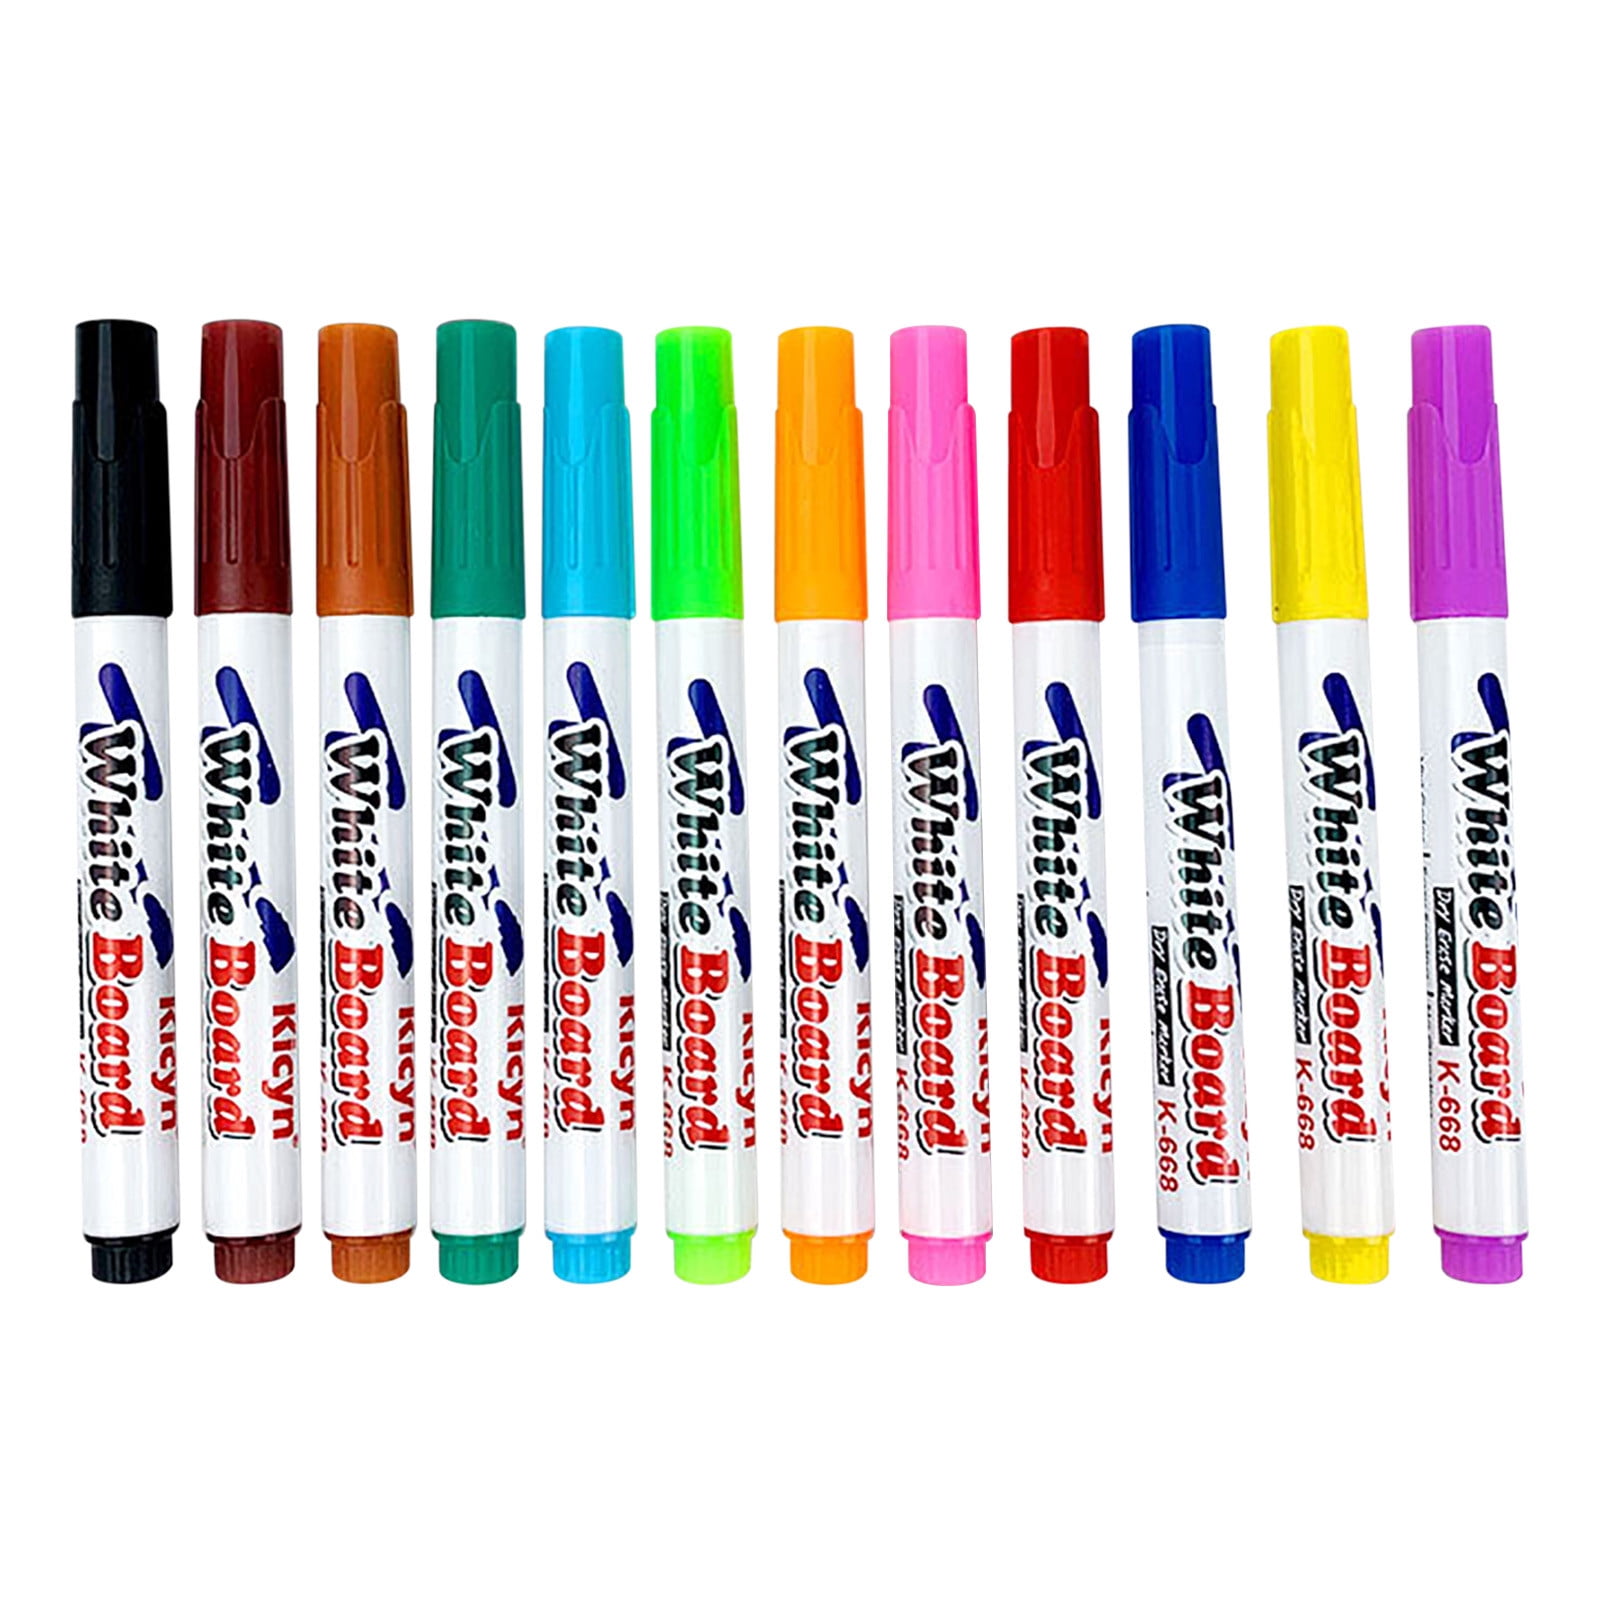  Dry Erase Marker for Black Glass Board, Maxtek Neon Chisel Tip Whiteboard  Marker, 8 Colors, 9 Count and Magnetic Wet Erase Marker, Fine Tip Whiteboard  Marker, 12 Colors Low Odor